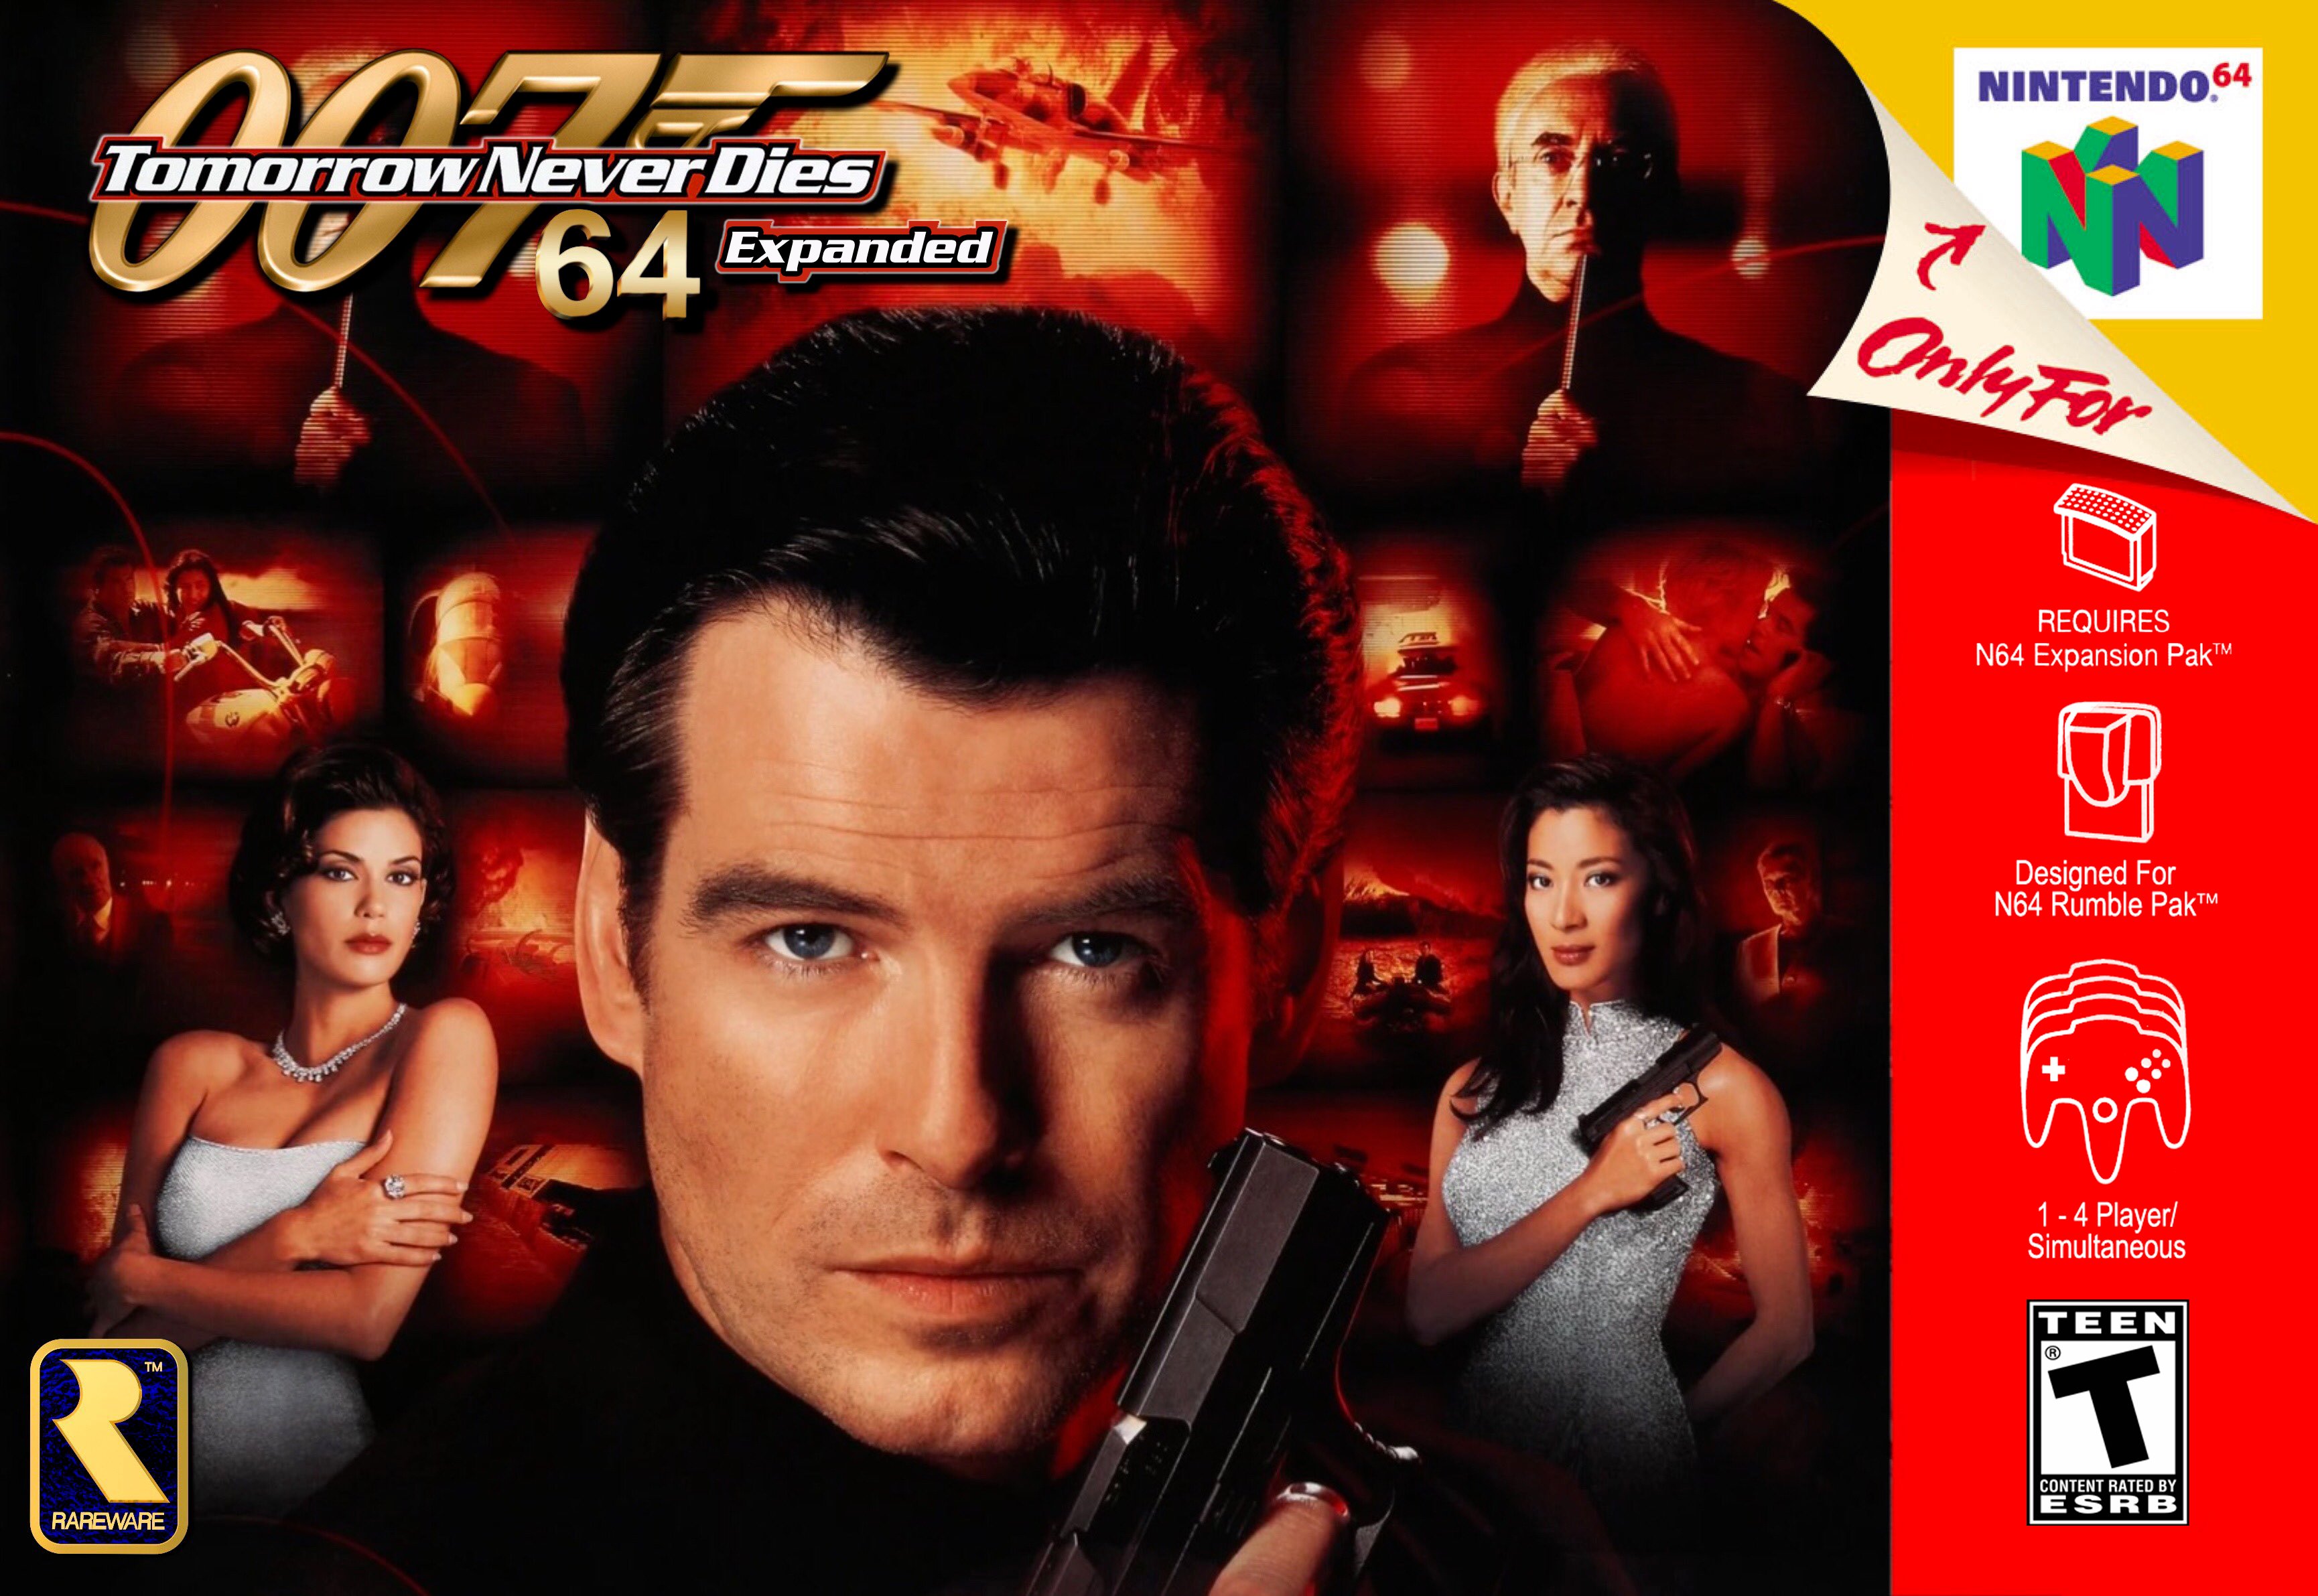 Jeg spiser morgenmad flydende undertrykkeren GoldenEye Mods on Twitter: "The "Expanded" version of Tomorrow Never Dies 64  is available now! This update sees various edits and model replacements to  the previous release, and includes brand new unlockable